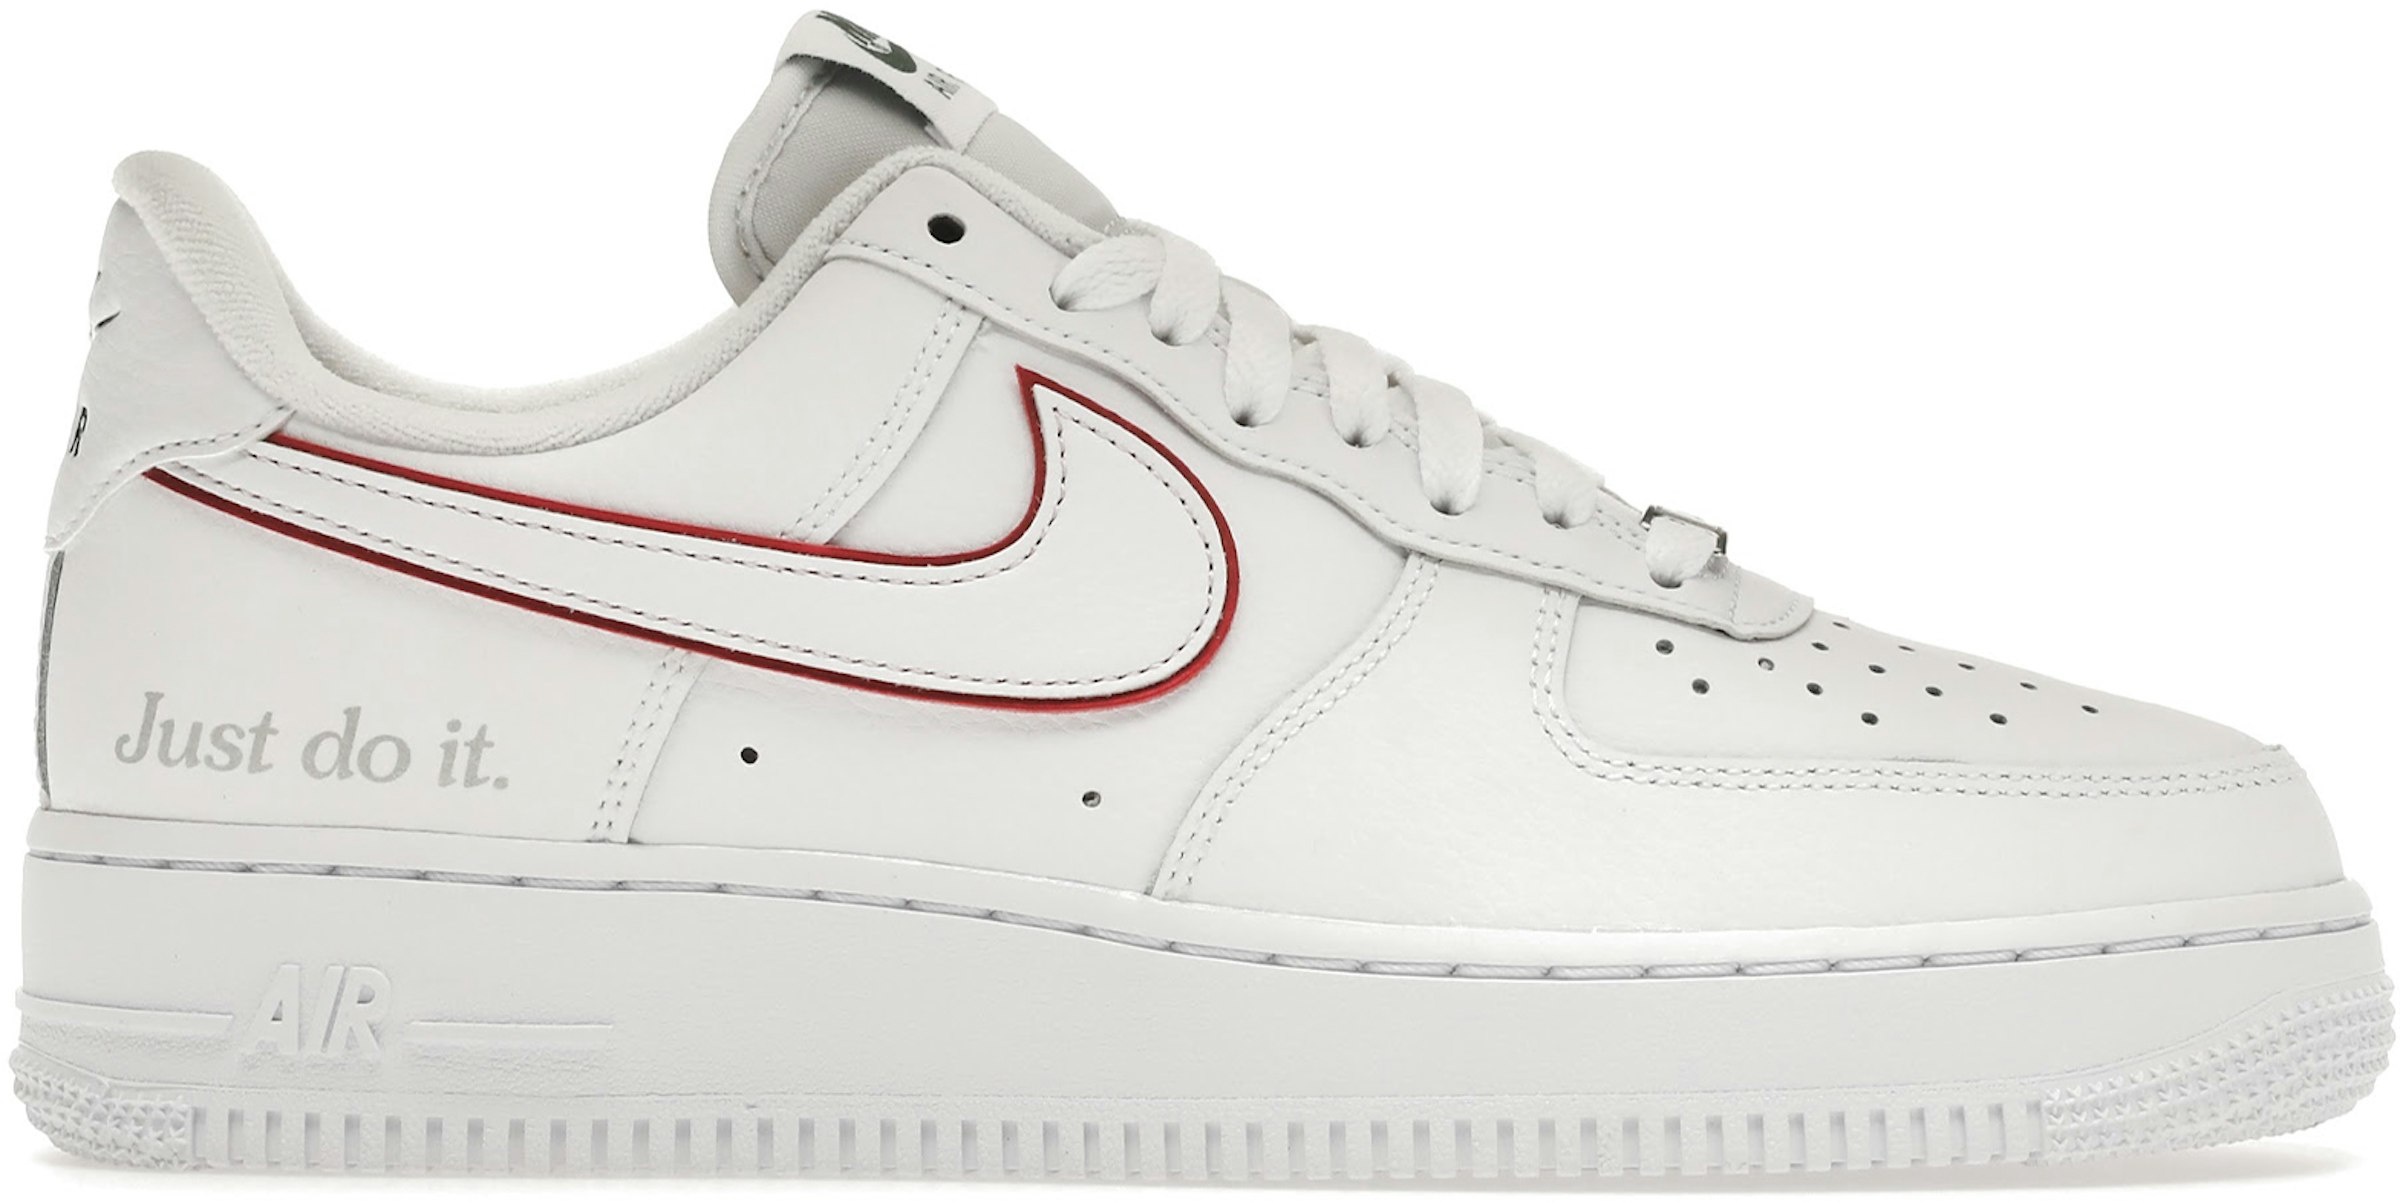 Air Force 1 Low Just Do It White Green Metallic Silver University Red Men's - DQ0791-100 US